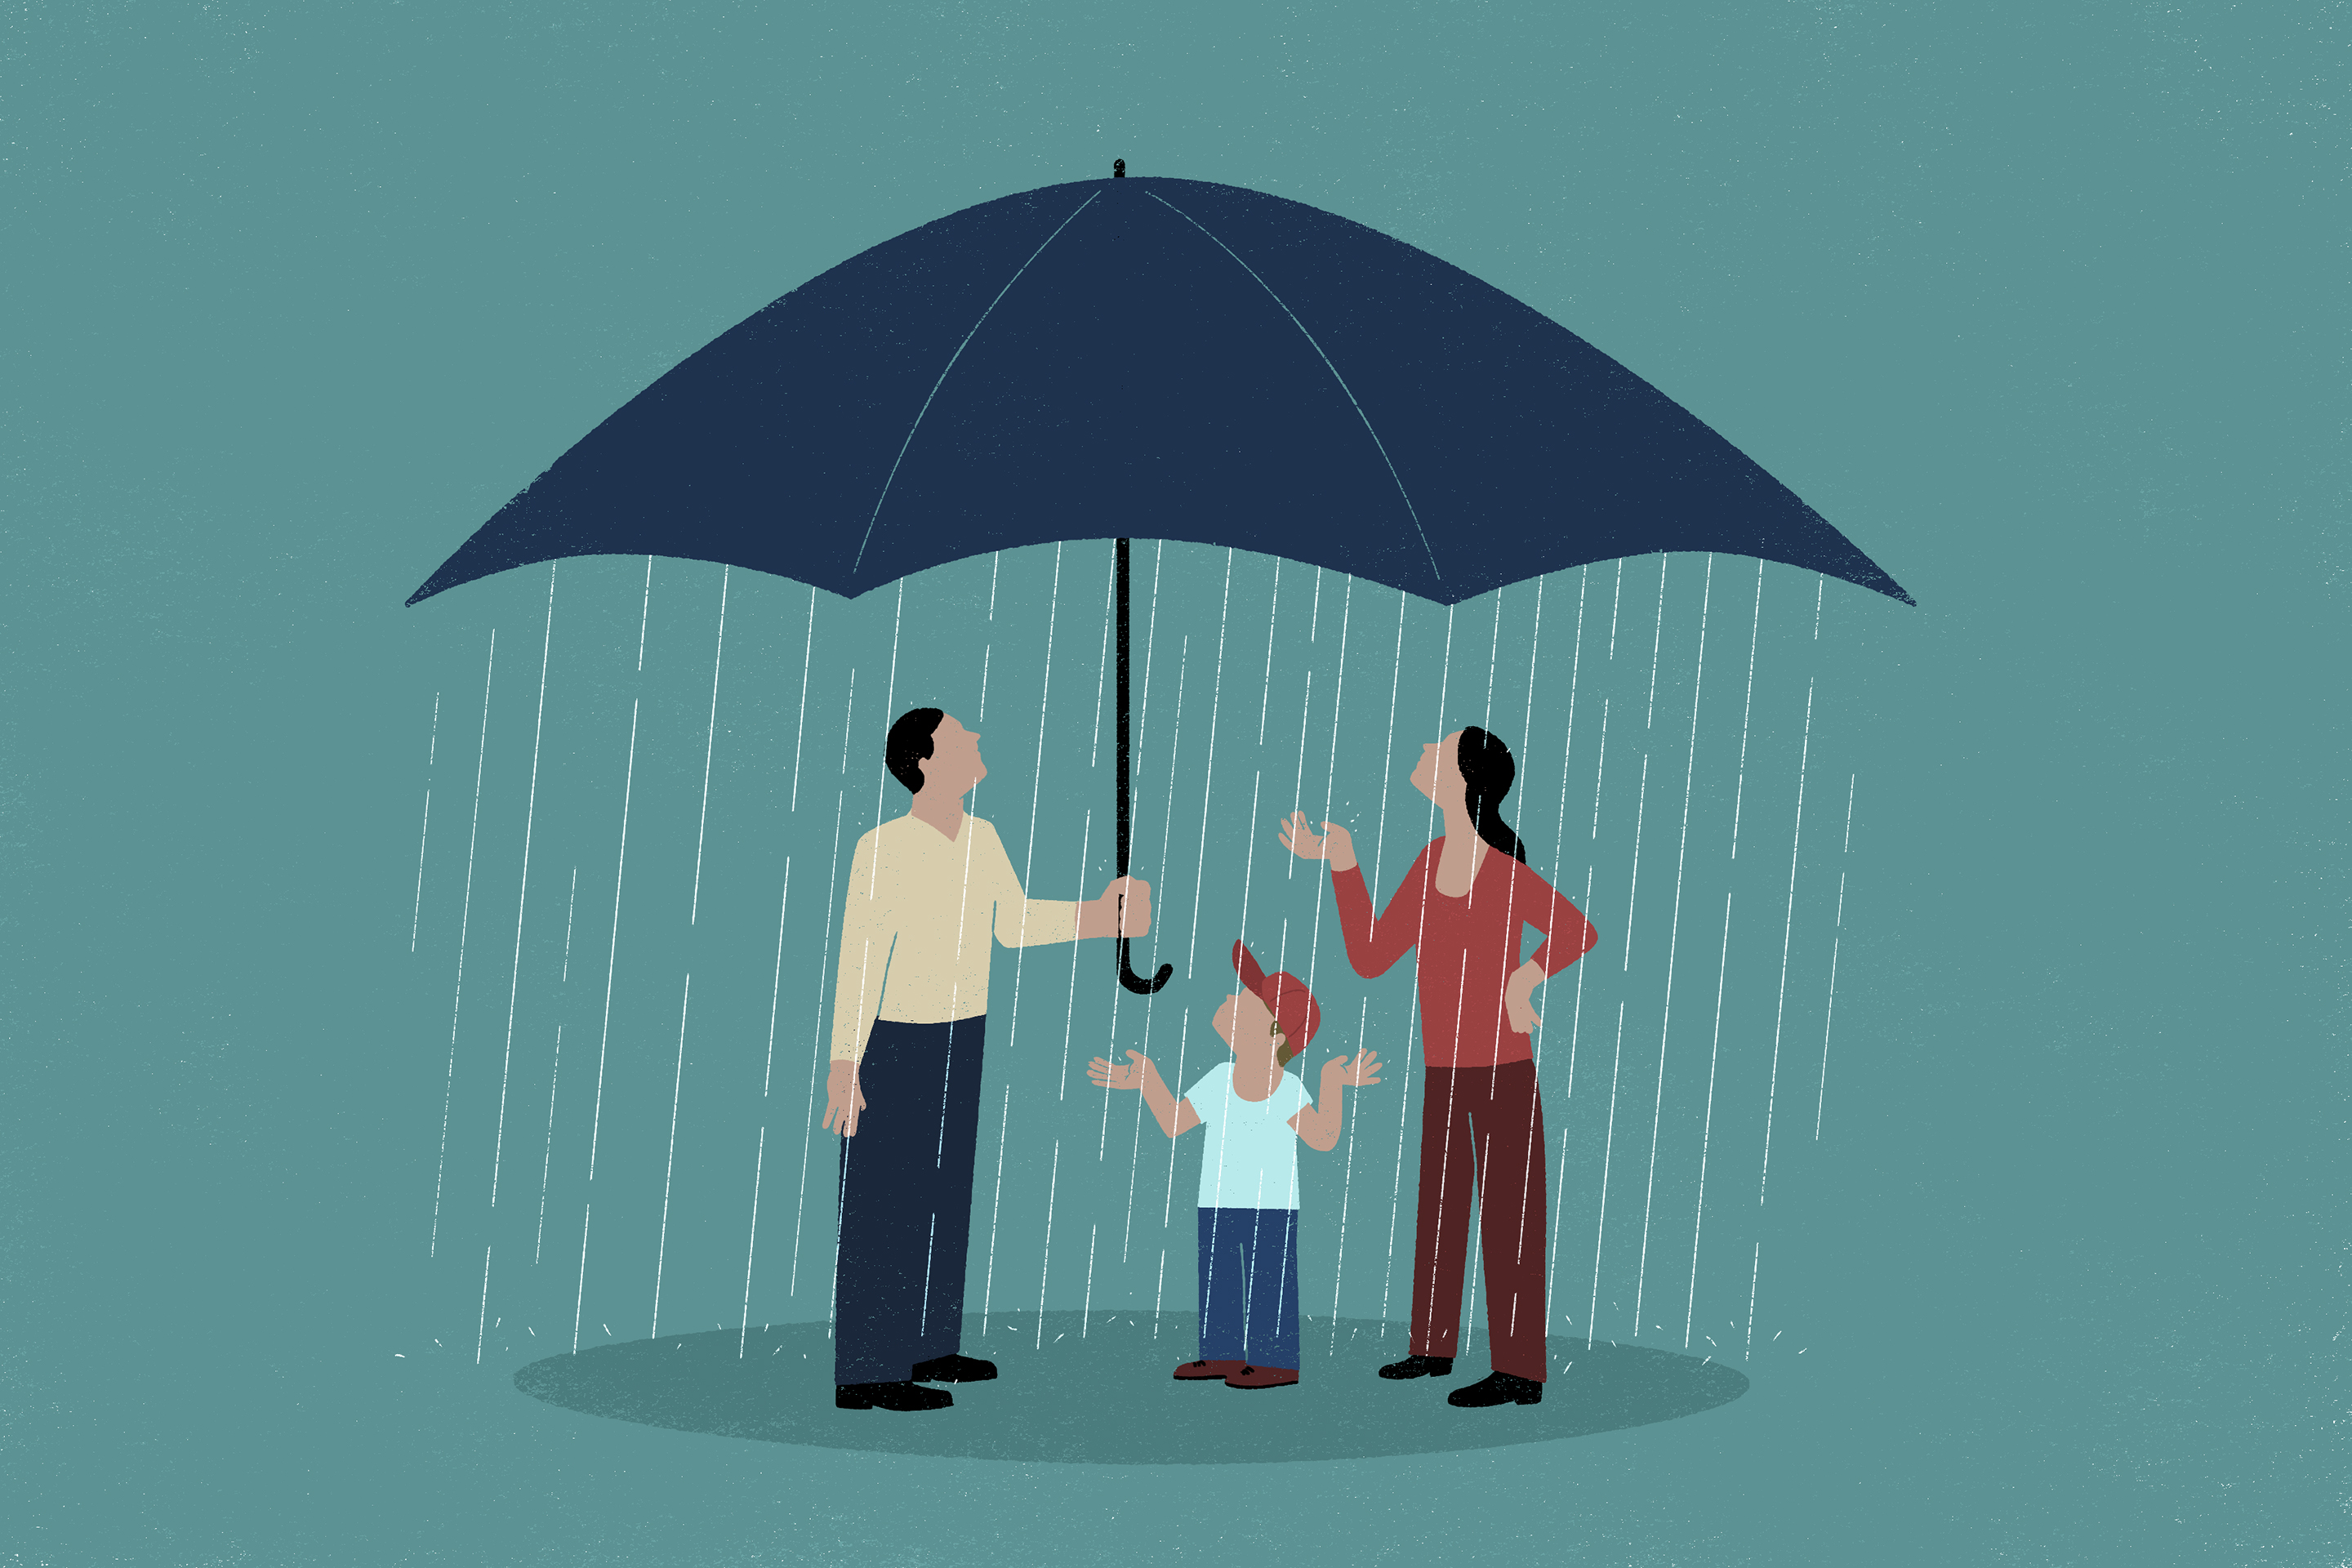 Insurers Sometimes Deny Life Insurance Claims. Prevent That From Happening to Your Family